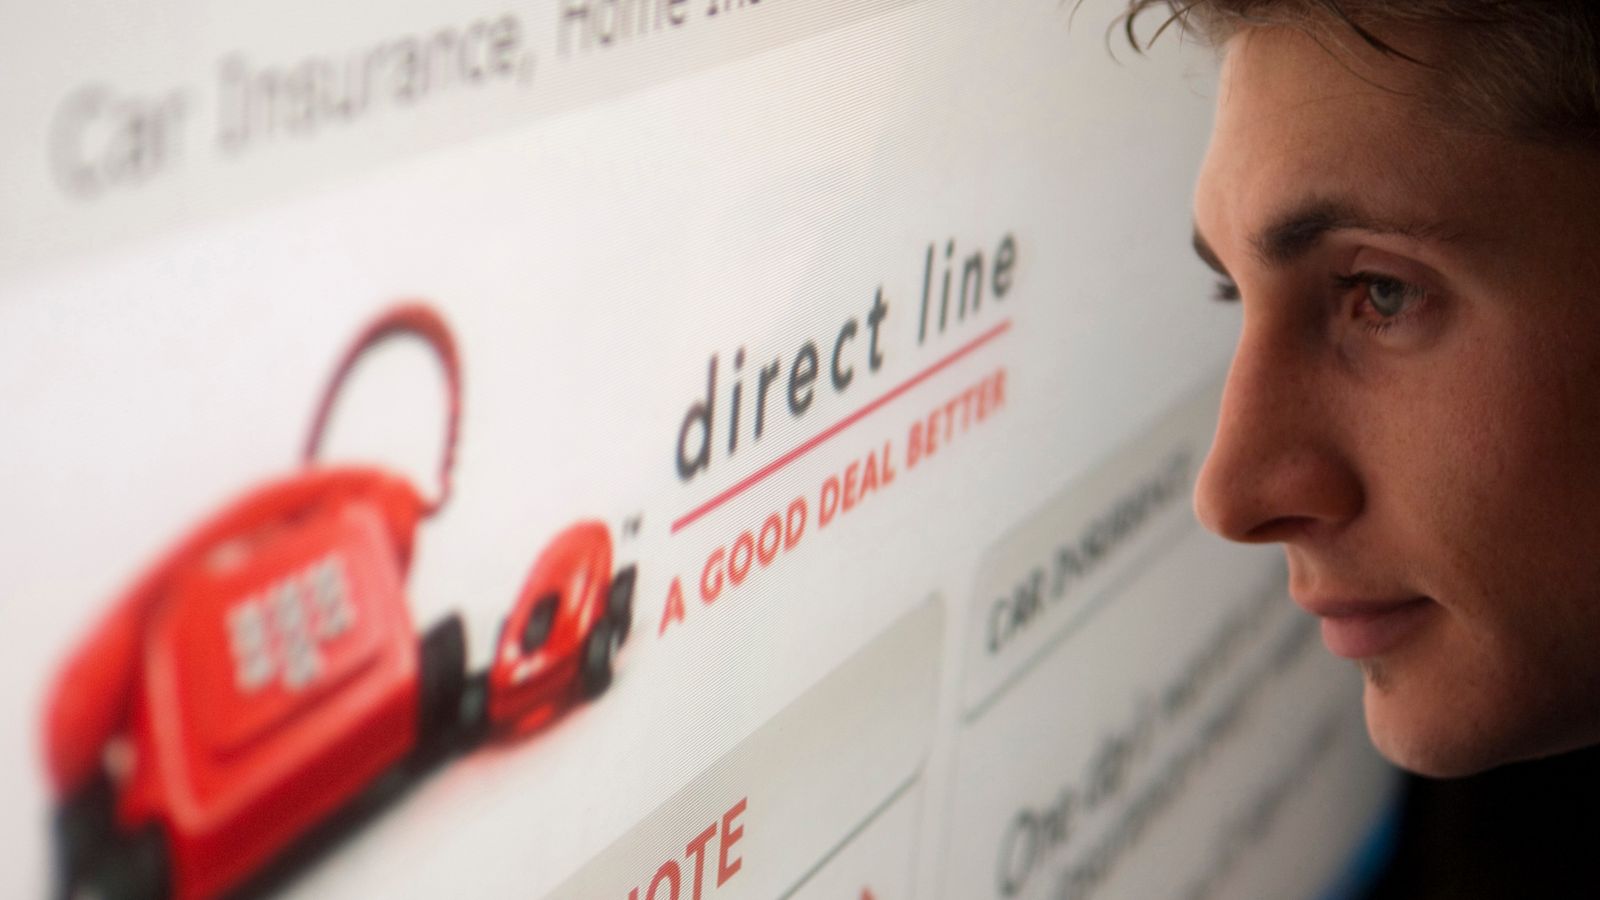 Direct Line approaches Aviva executive Winslow about CEO vacancy